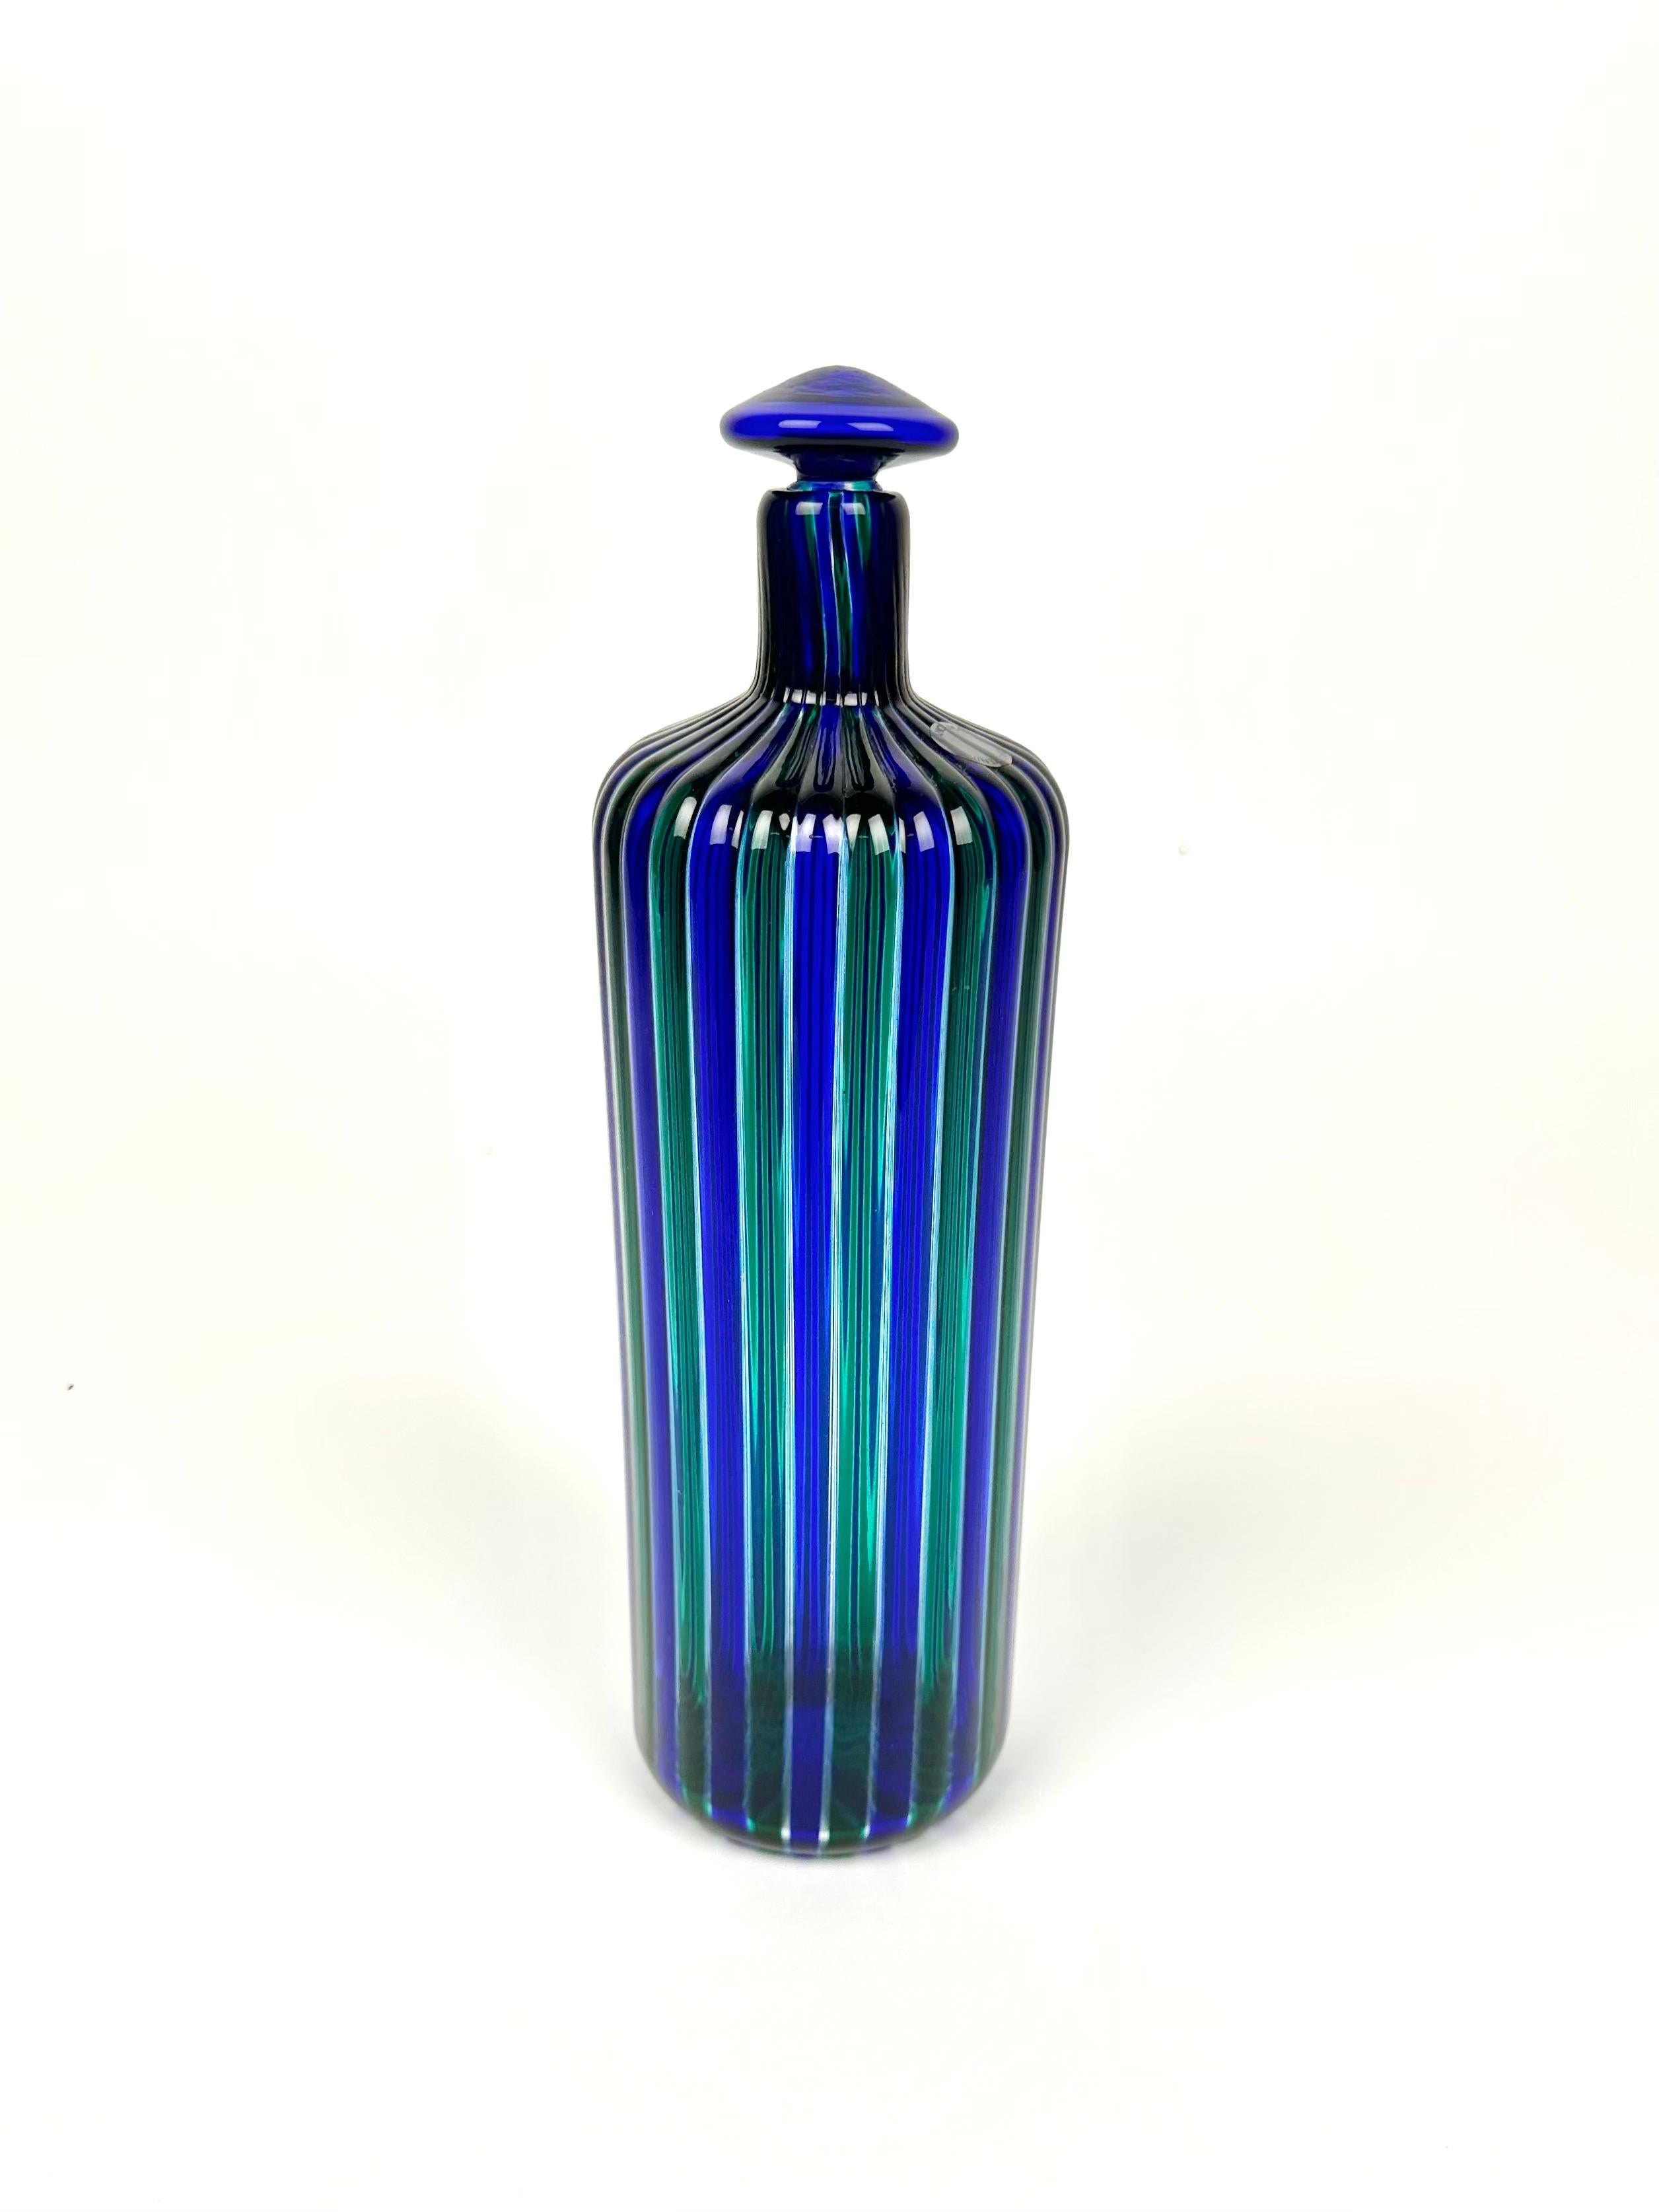 Astonishing blue and green Murano glass bottle by Fulvio Bianconi for Venini.

Signed “Venini88” on the bottom, as shown in the pictures. 

Made in Italy in 1988.